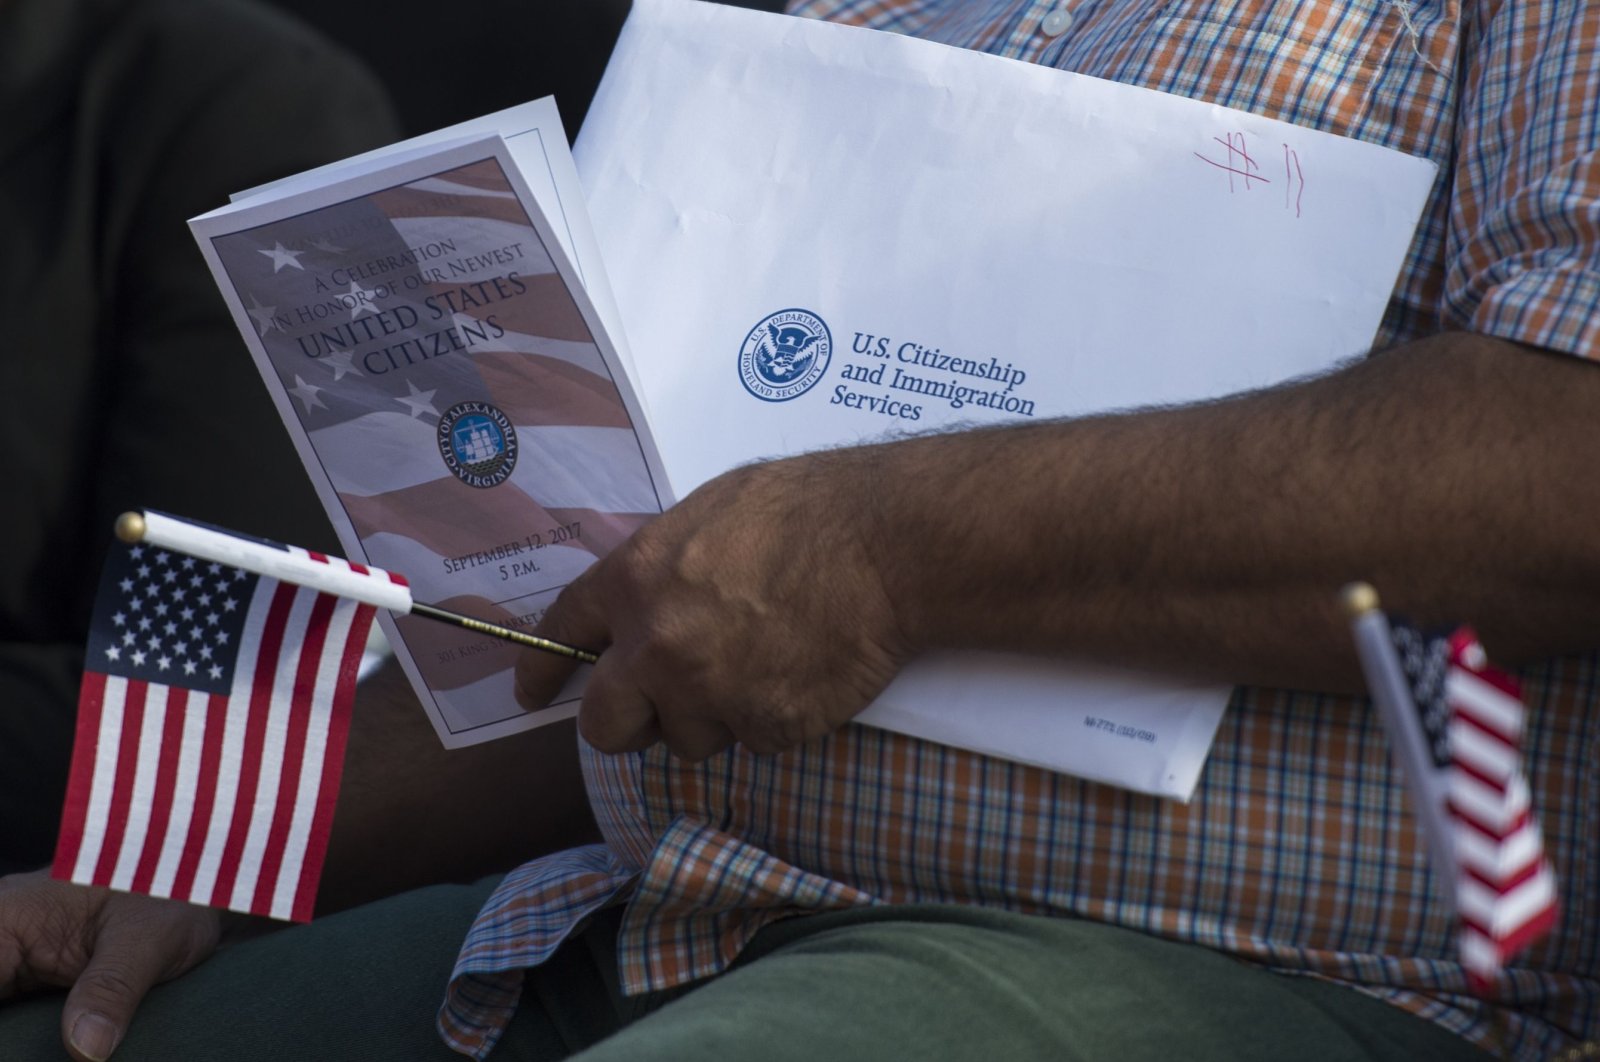 A new U.S. citizen holds an information packet at a naturalization ceremony at Alexandria City Hall in Alexandria, Va., Sept. 12, 2017. (AFP Photo)